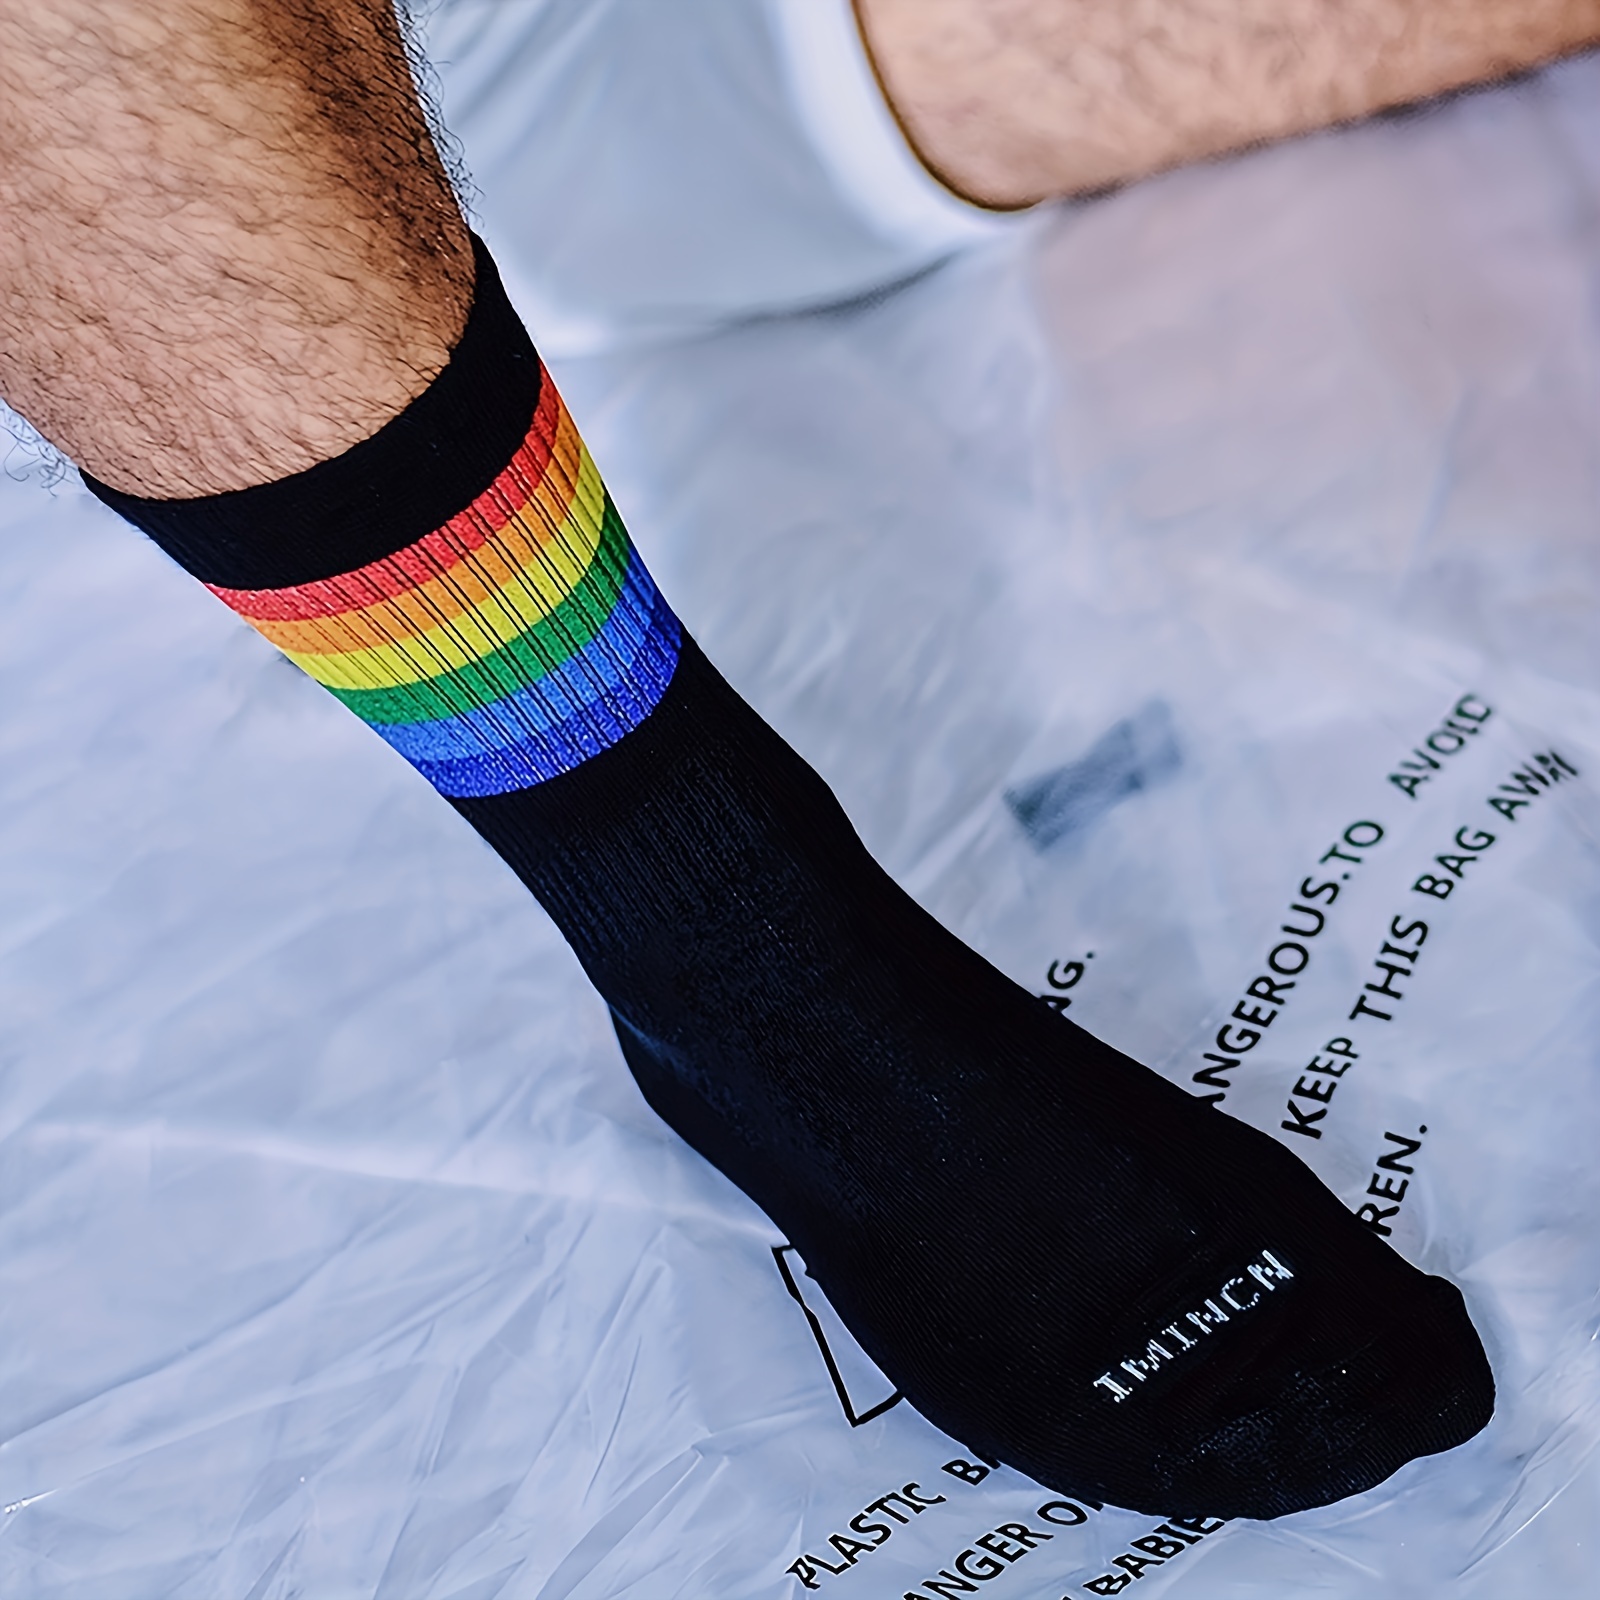 Bulk, Wholesale Rainbow Striped Ankle Socks for Gay Pride – We are